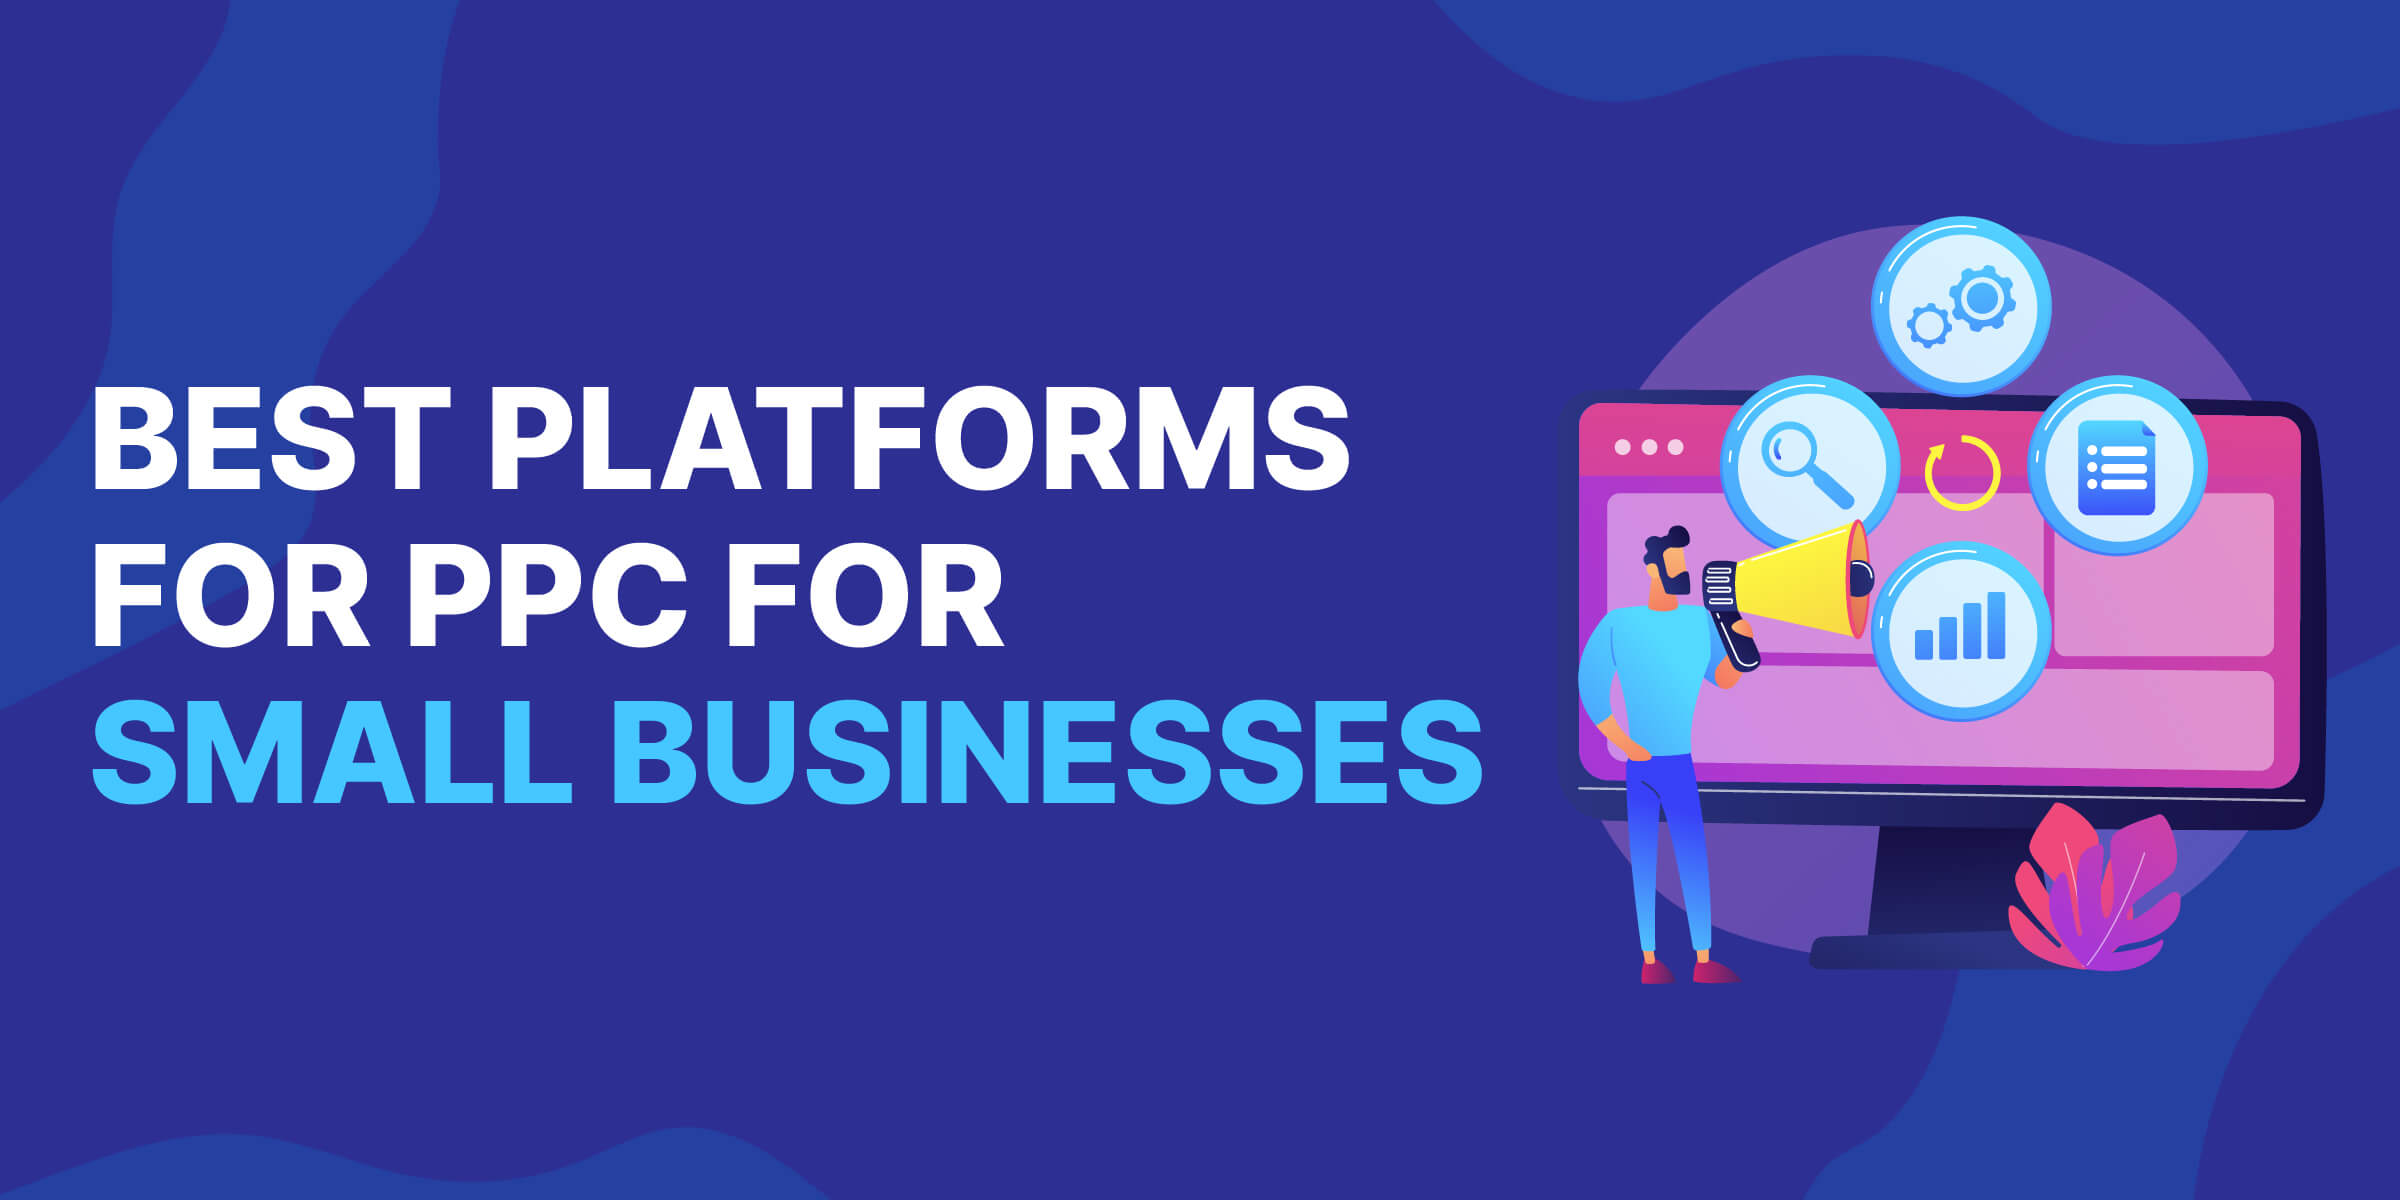 Best Platforms for PPC for Small Businesses